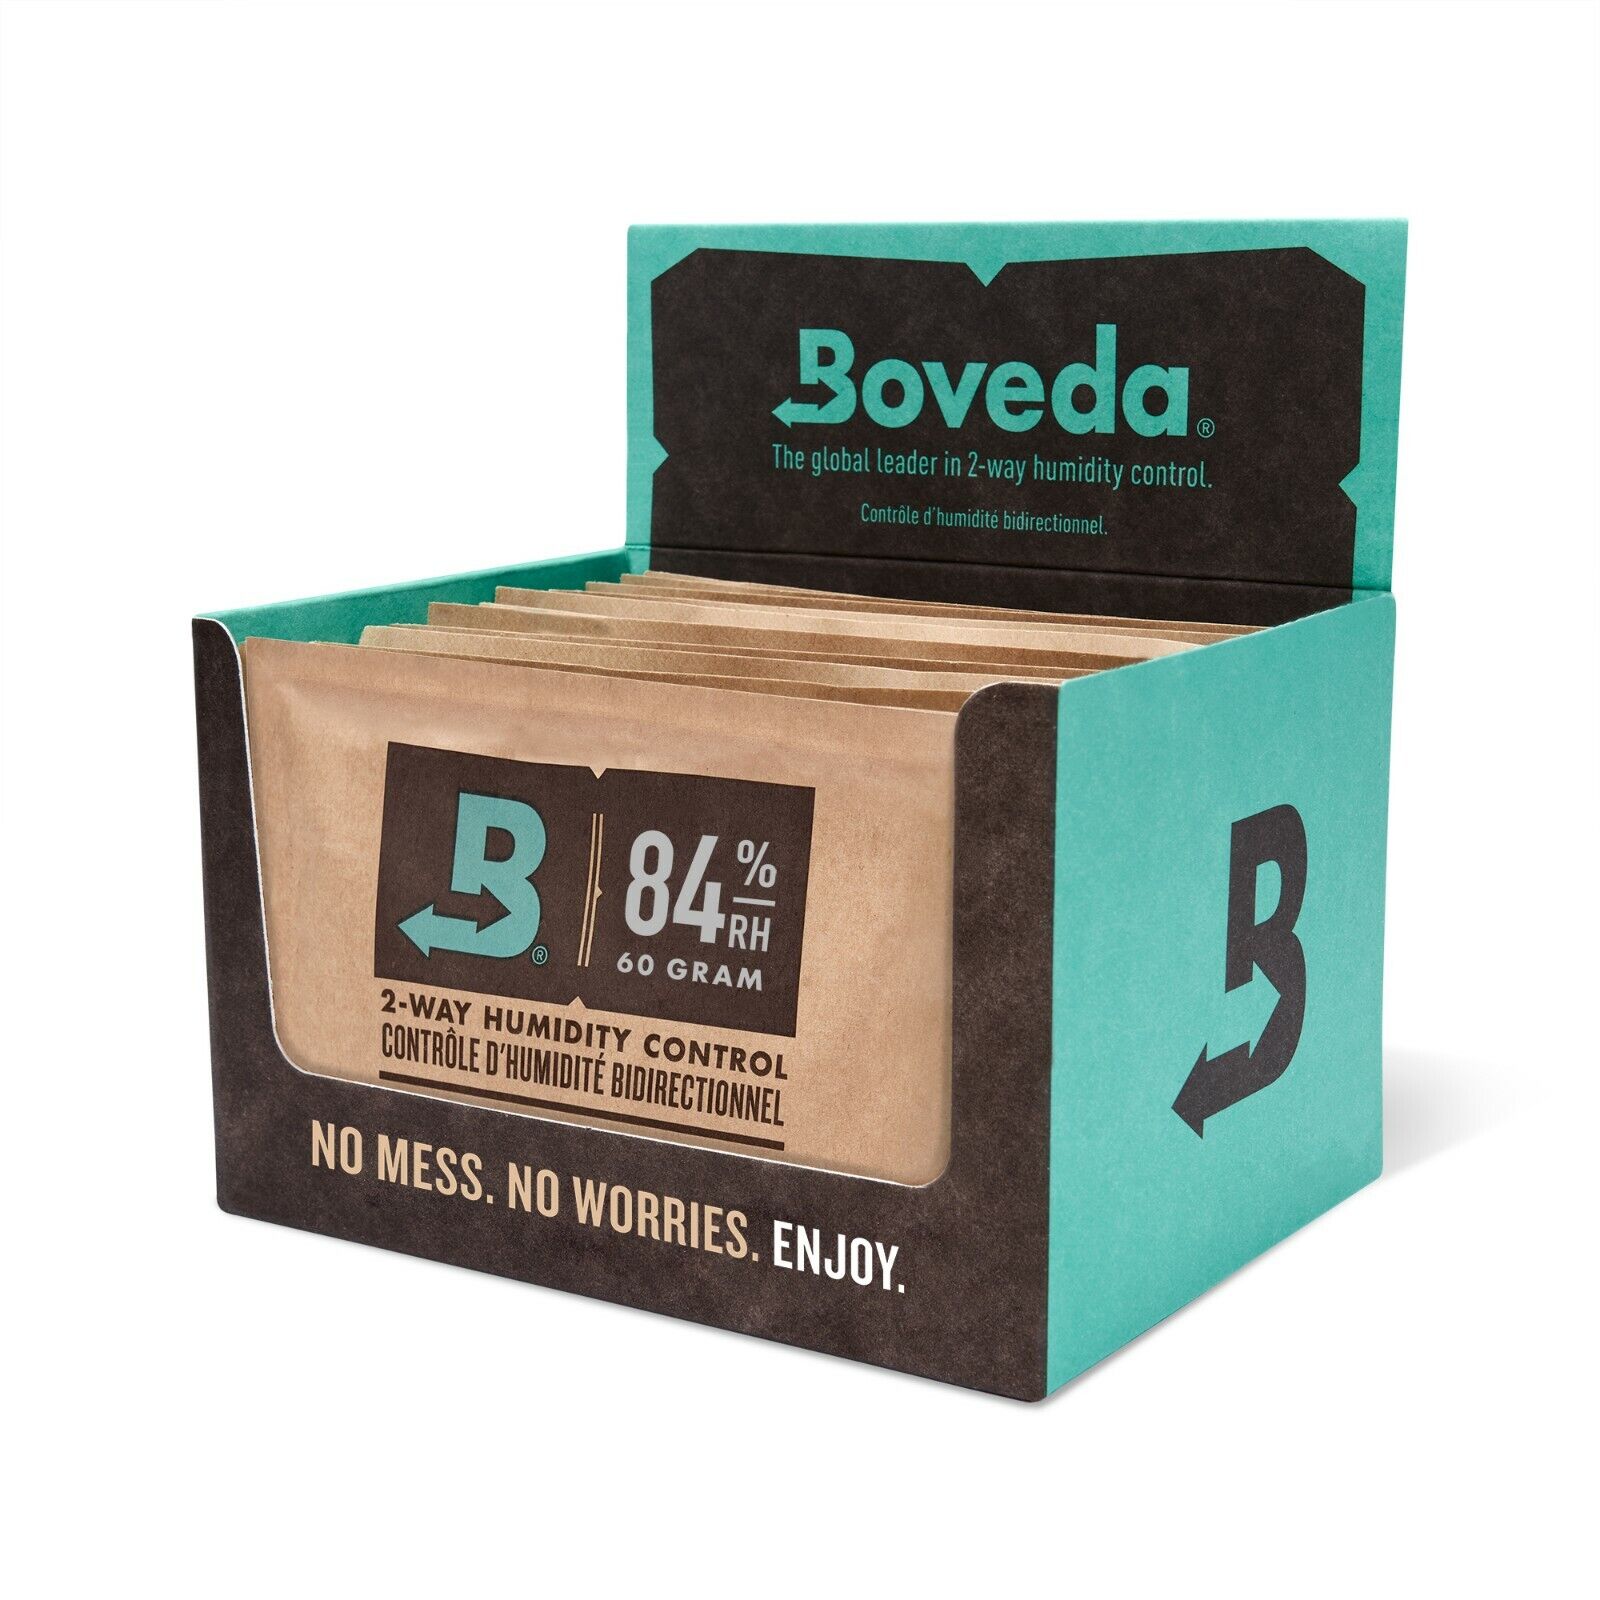 Boveda 84% RH 2-Way Humidity Control - Protects & Restores - Size 60 - 12 Count